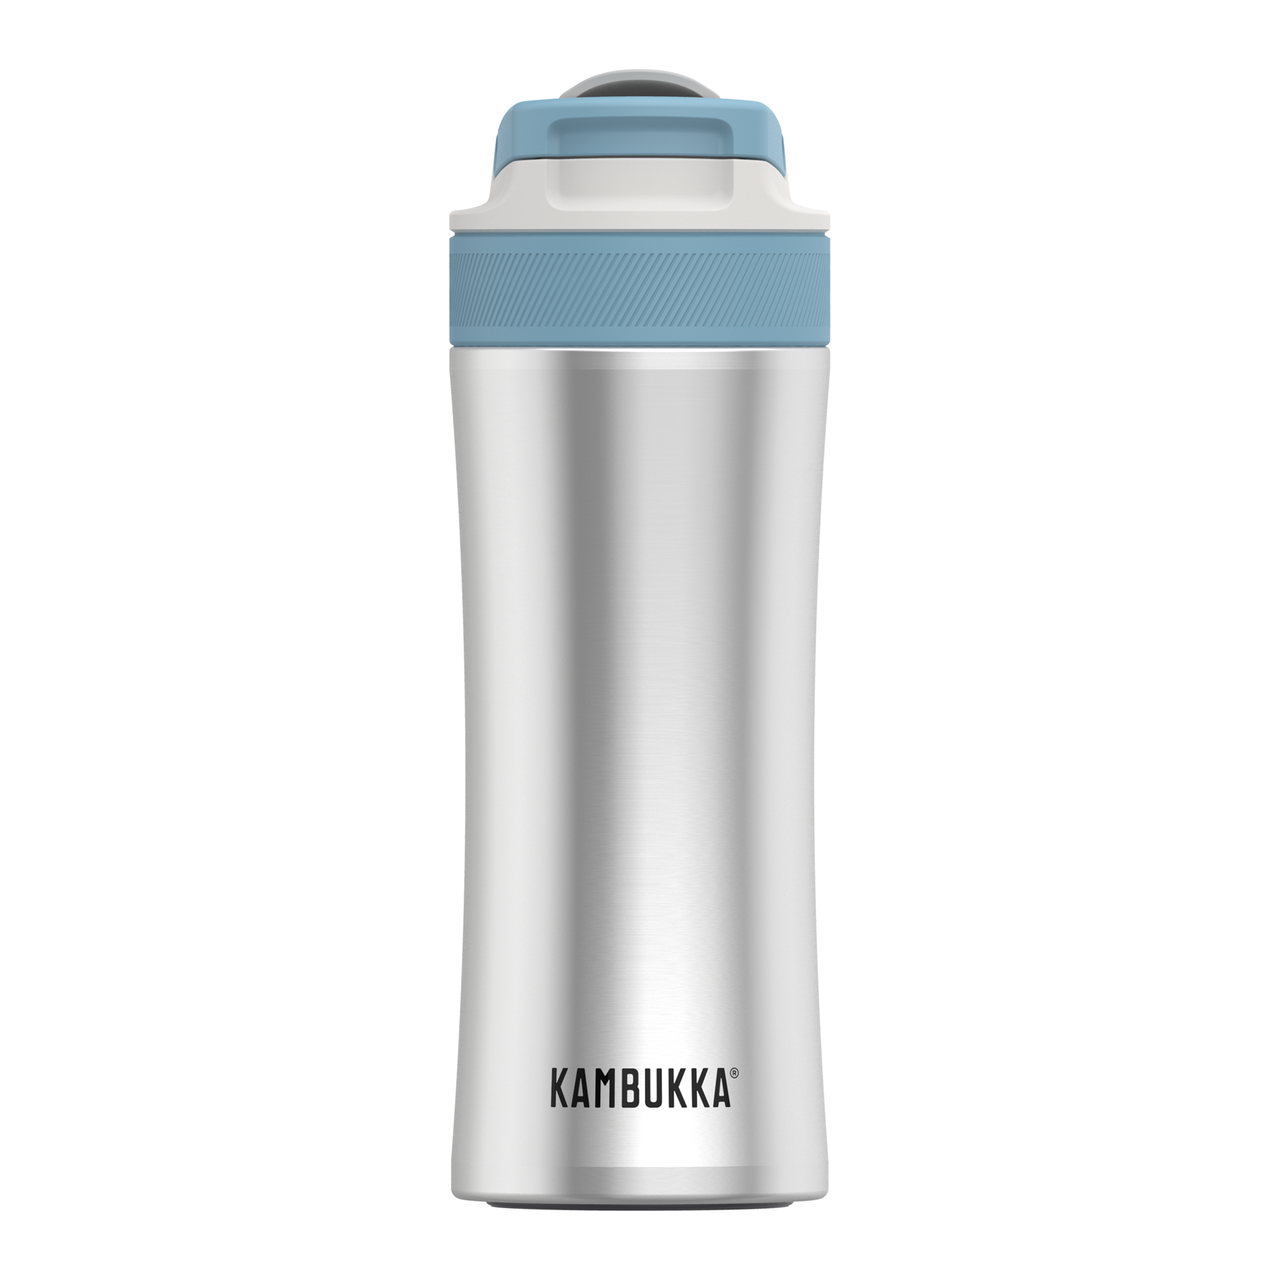 BPA FREE SS INSULATED WATER BOTTLE WITH SPOUT LID